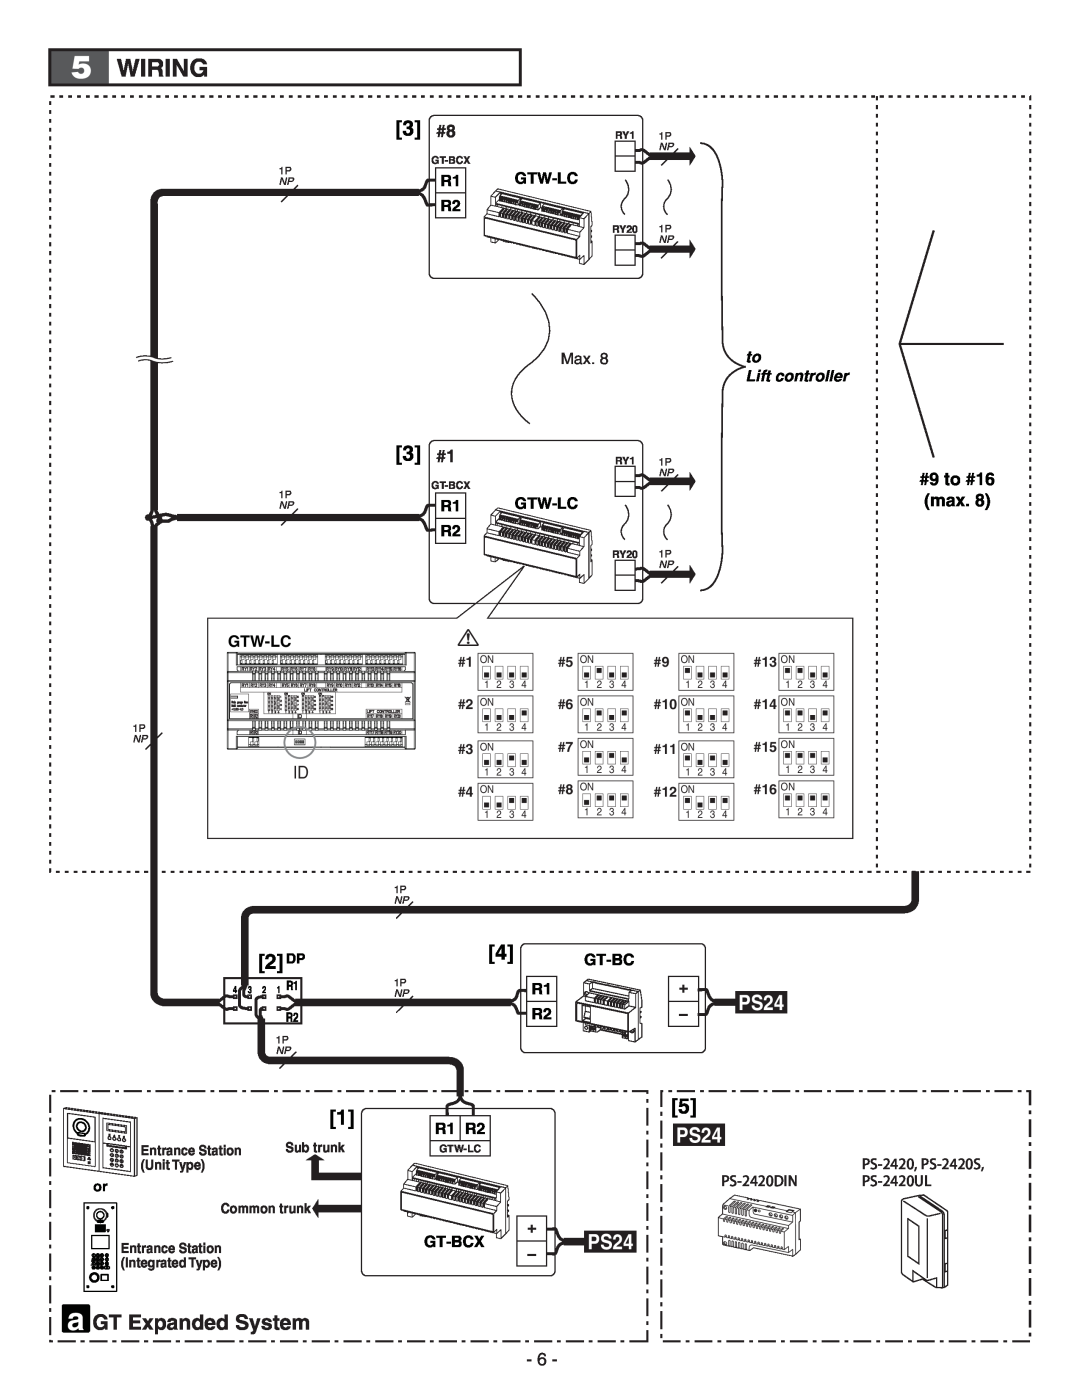 Aiphone GTW-LC service manual Wiring, a GT Expanded System, #9 to #16 max, Gtw-Lc, R1 R2, Gt-Bcx, PS24, Lift controller 